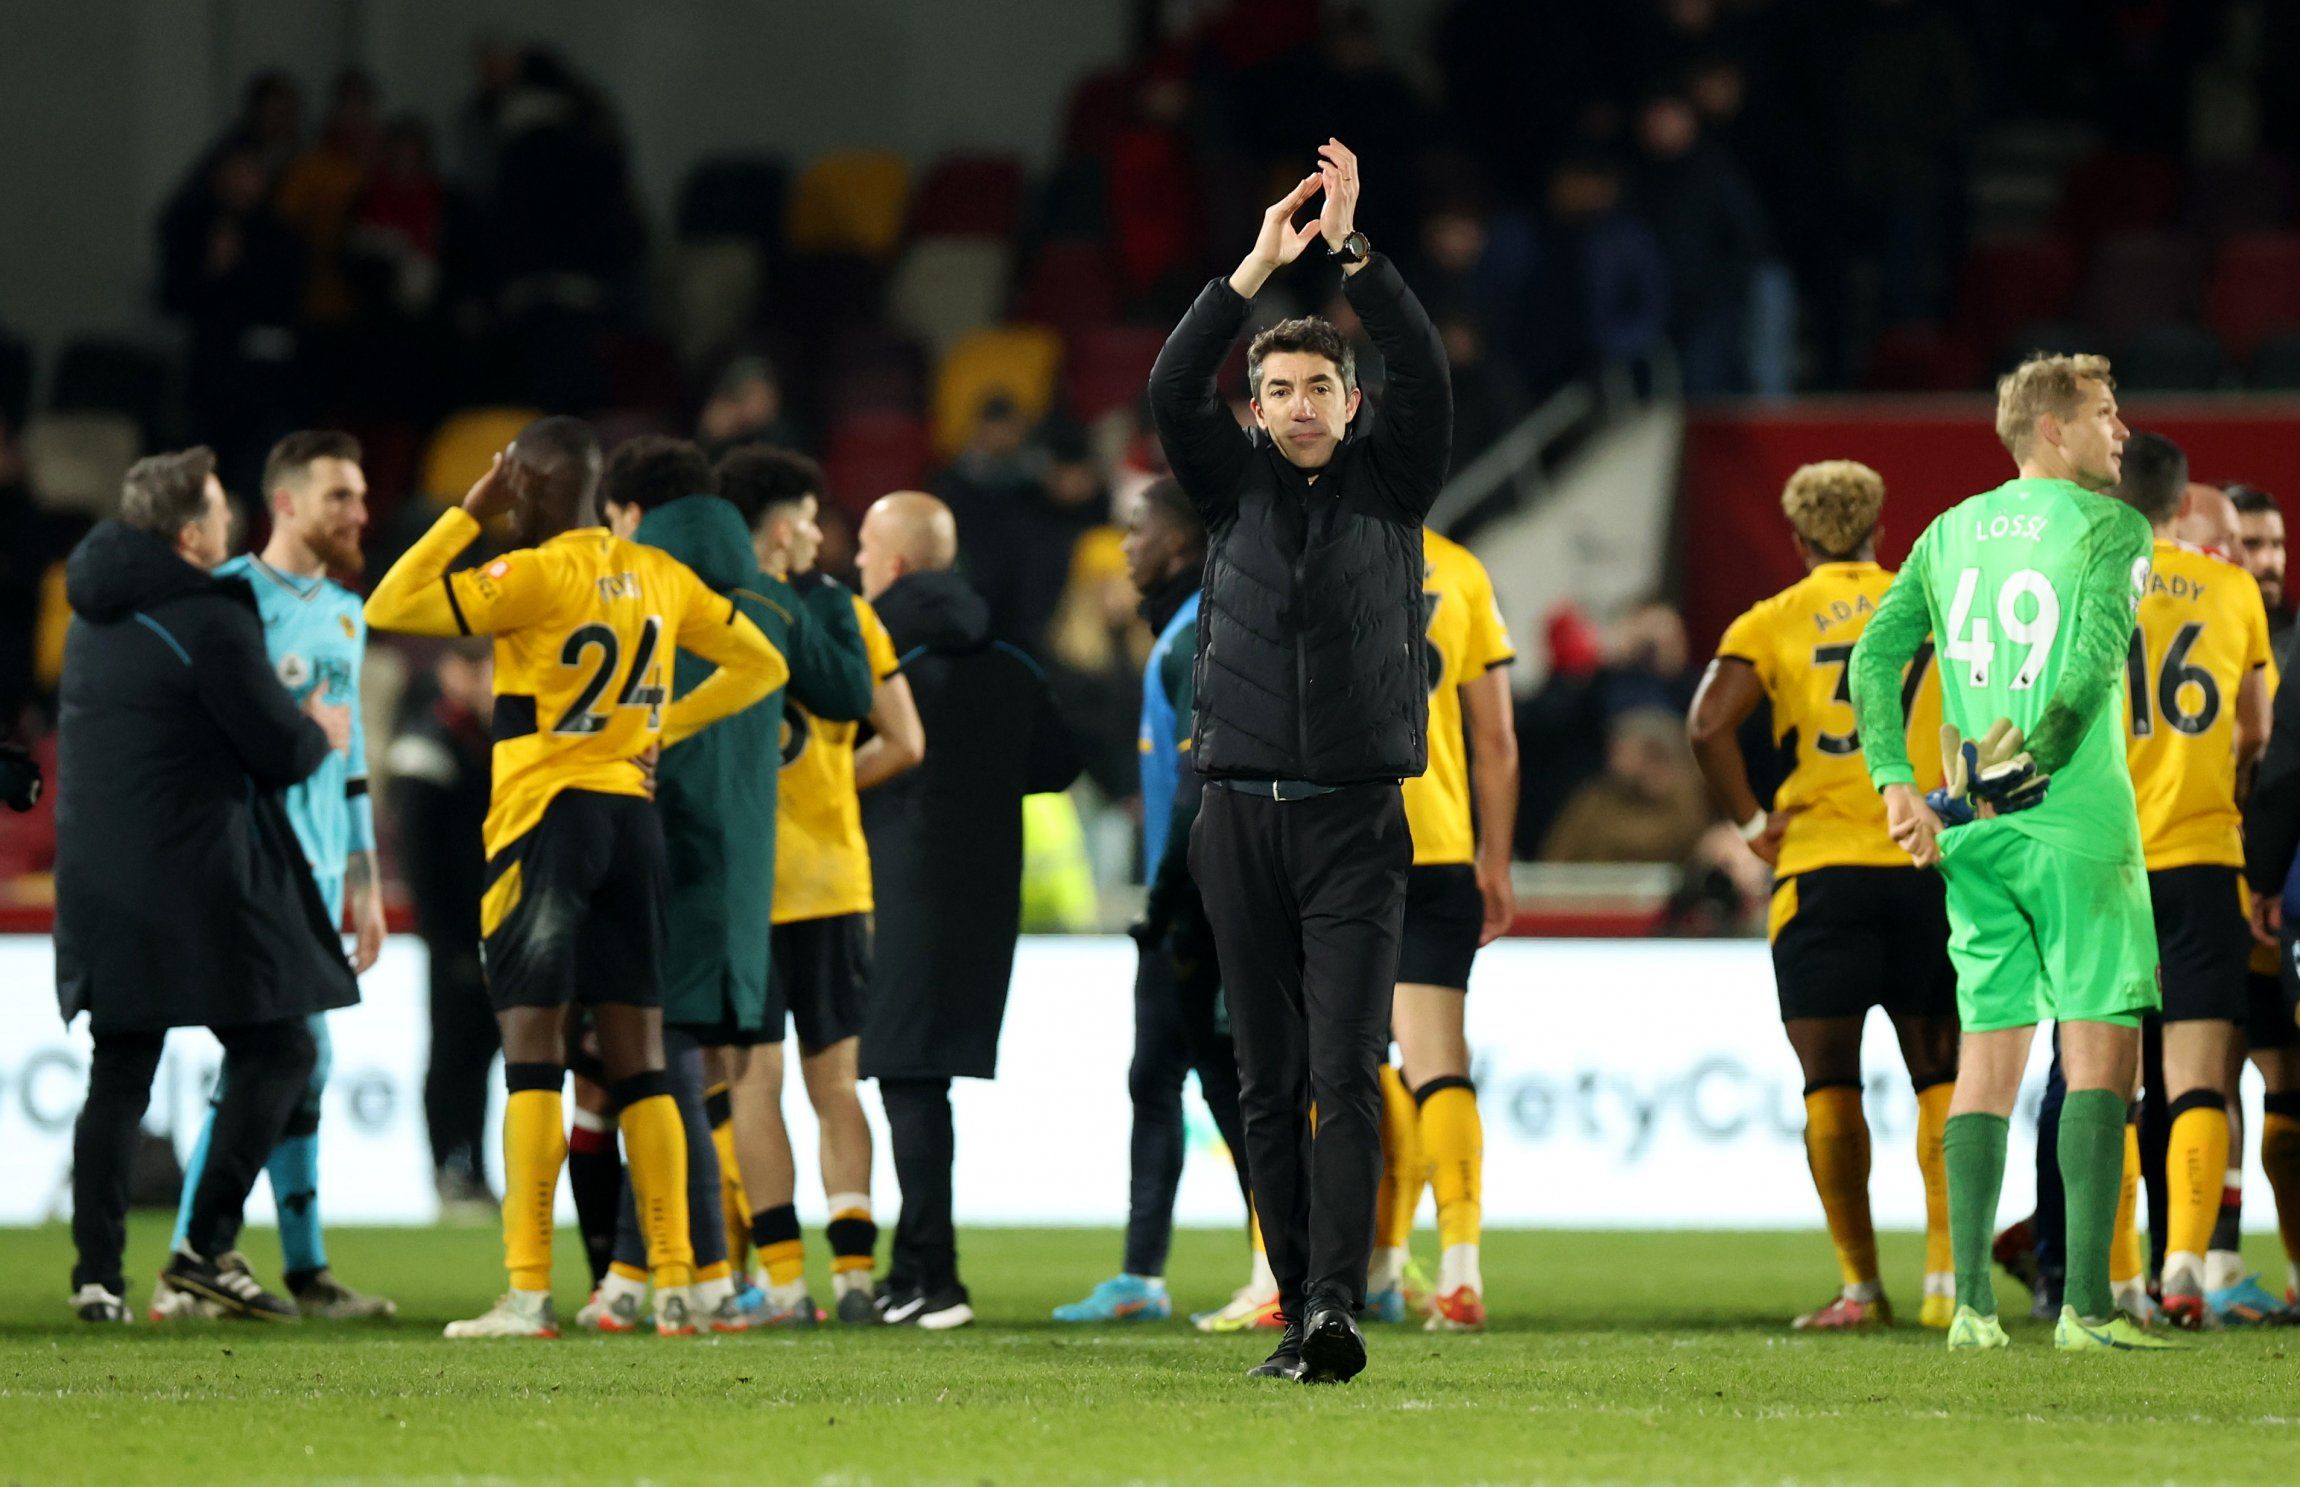 Bruno Lage, Fosun, Jeff Shi, Molineux, The Old Gold, Wolves, Wolves fans, Wolves info, Wolves latest, Wolves news, Wolves updates, WWFC, WWFC news, WWFC update, Premier League, Premier League news, Wolverhampton Wanderers, Wolves v Arsenal, Predicted XI, Wolves team news, 
